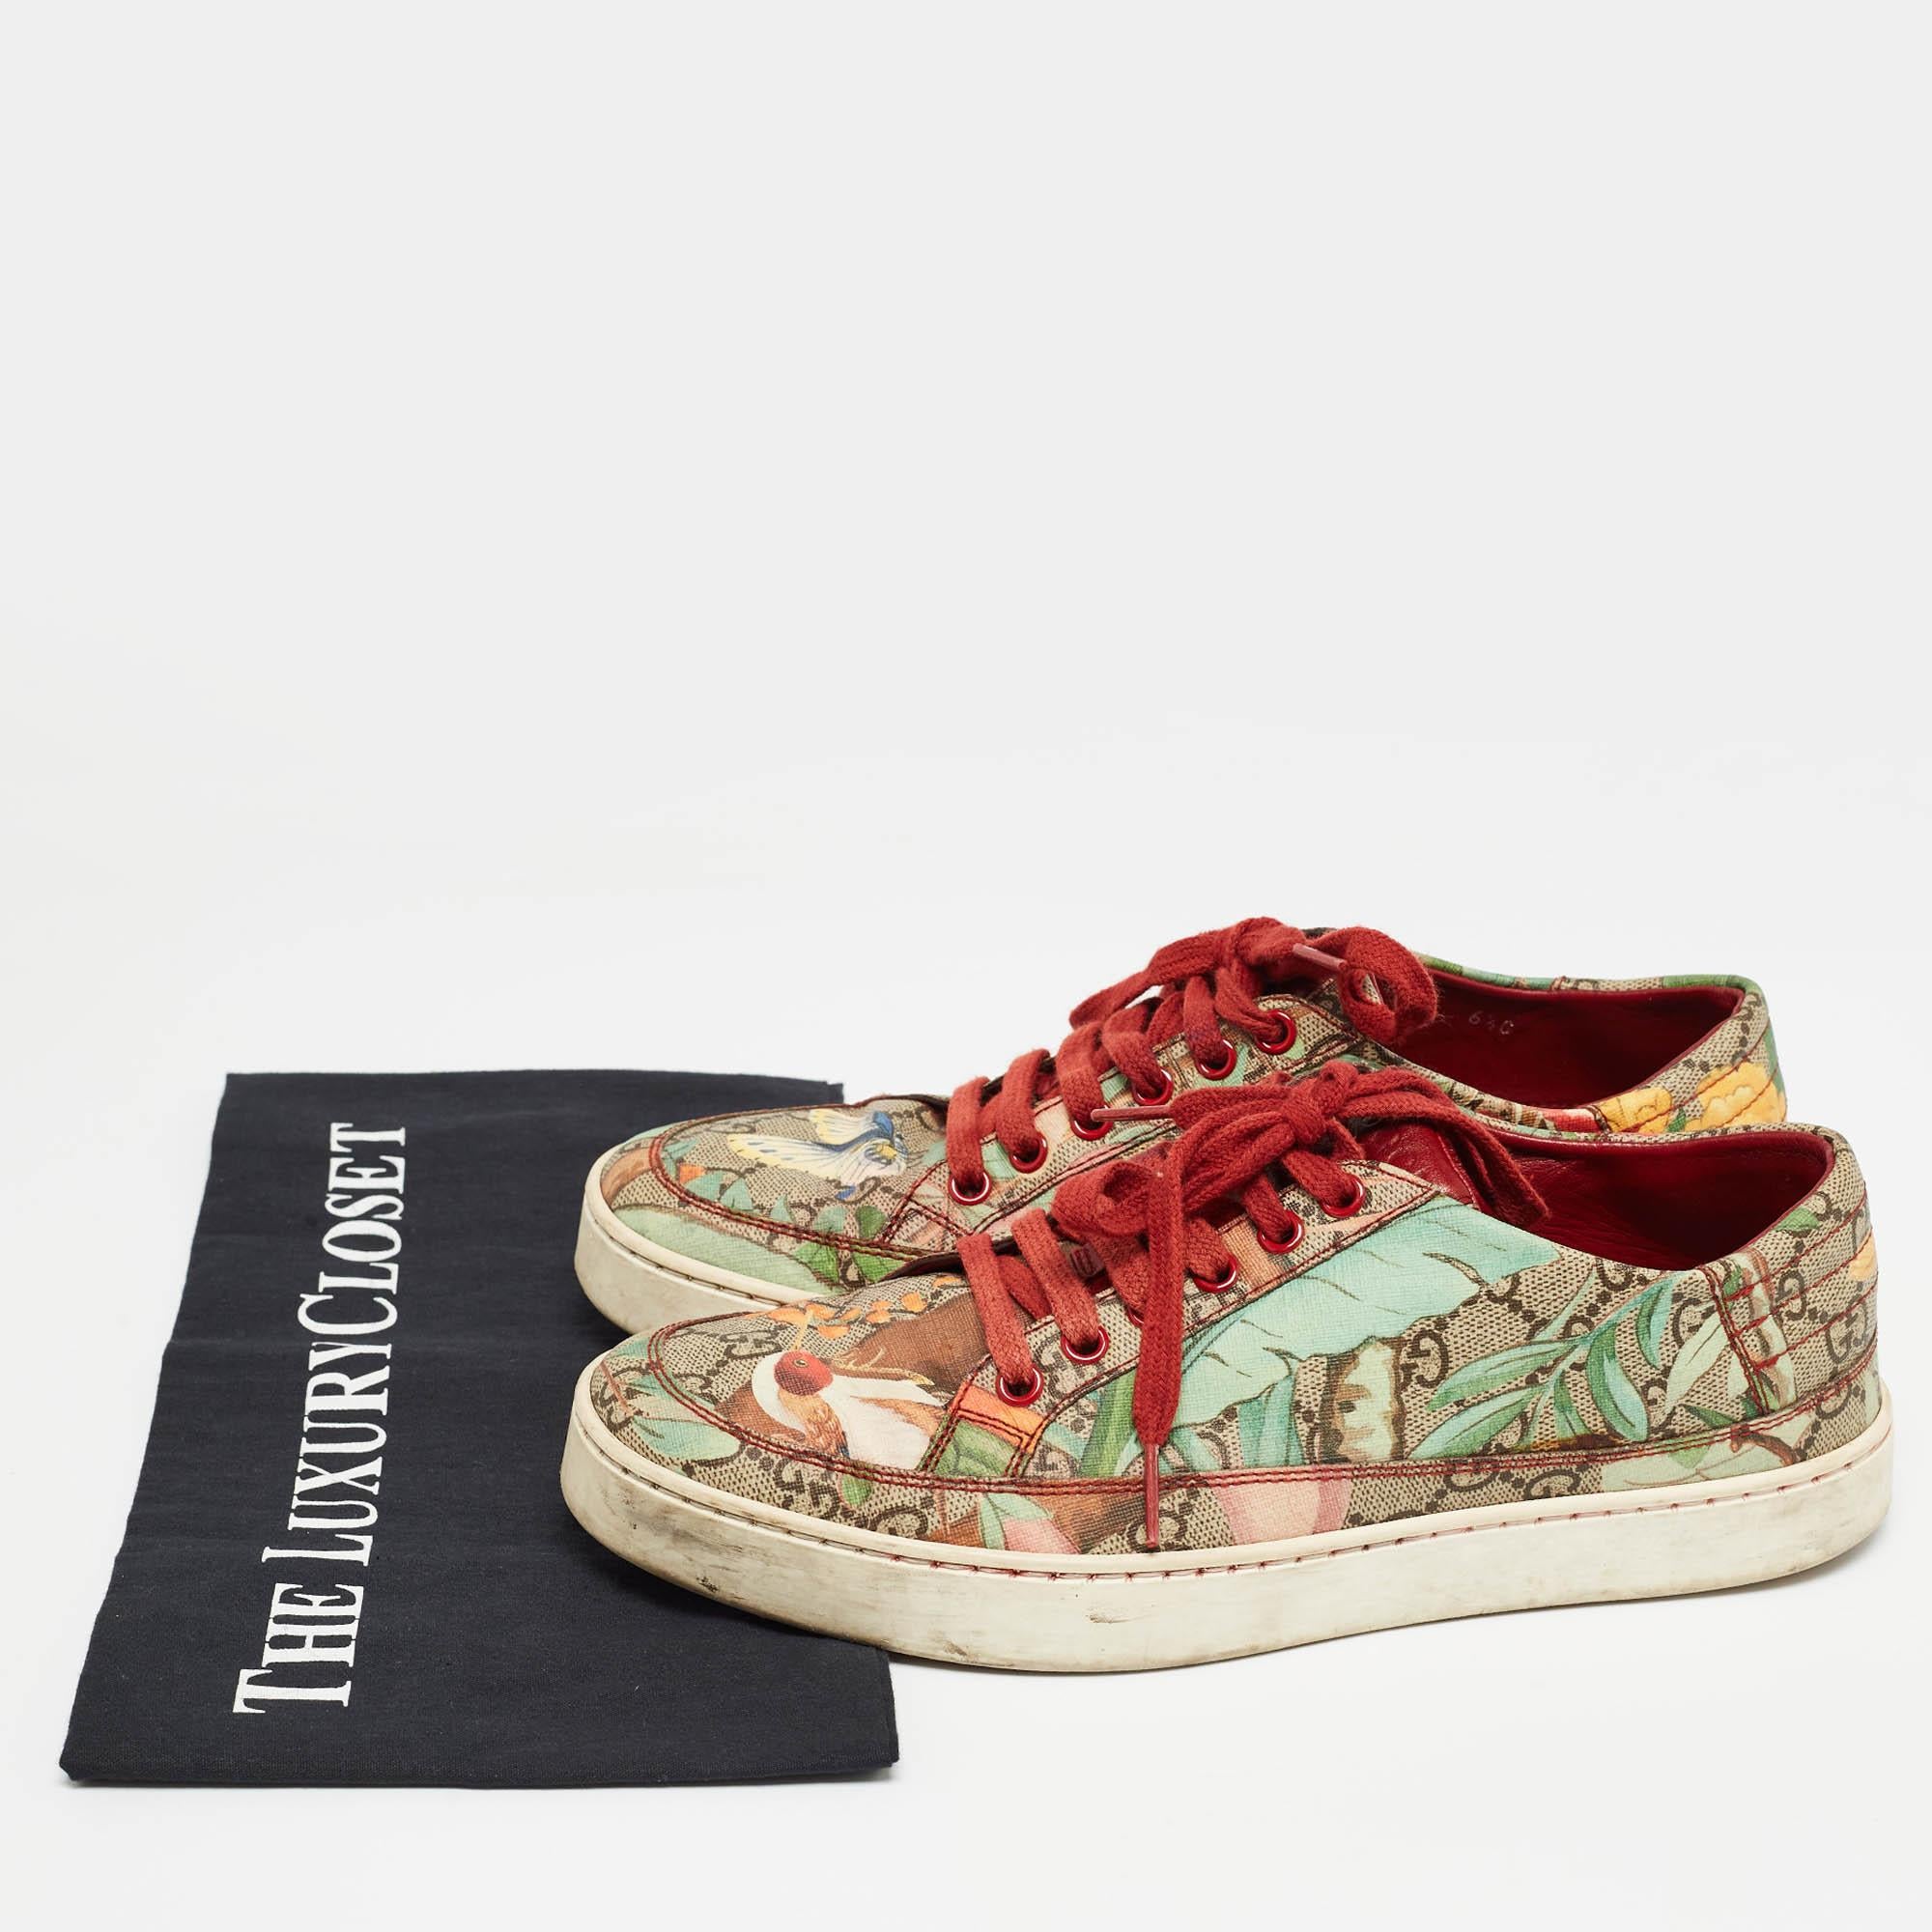 Gucci Multicolor Canvas Tian Low Top Sneakers Size 40.5 For Sale 5